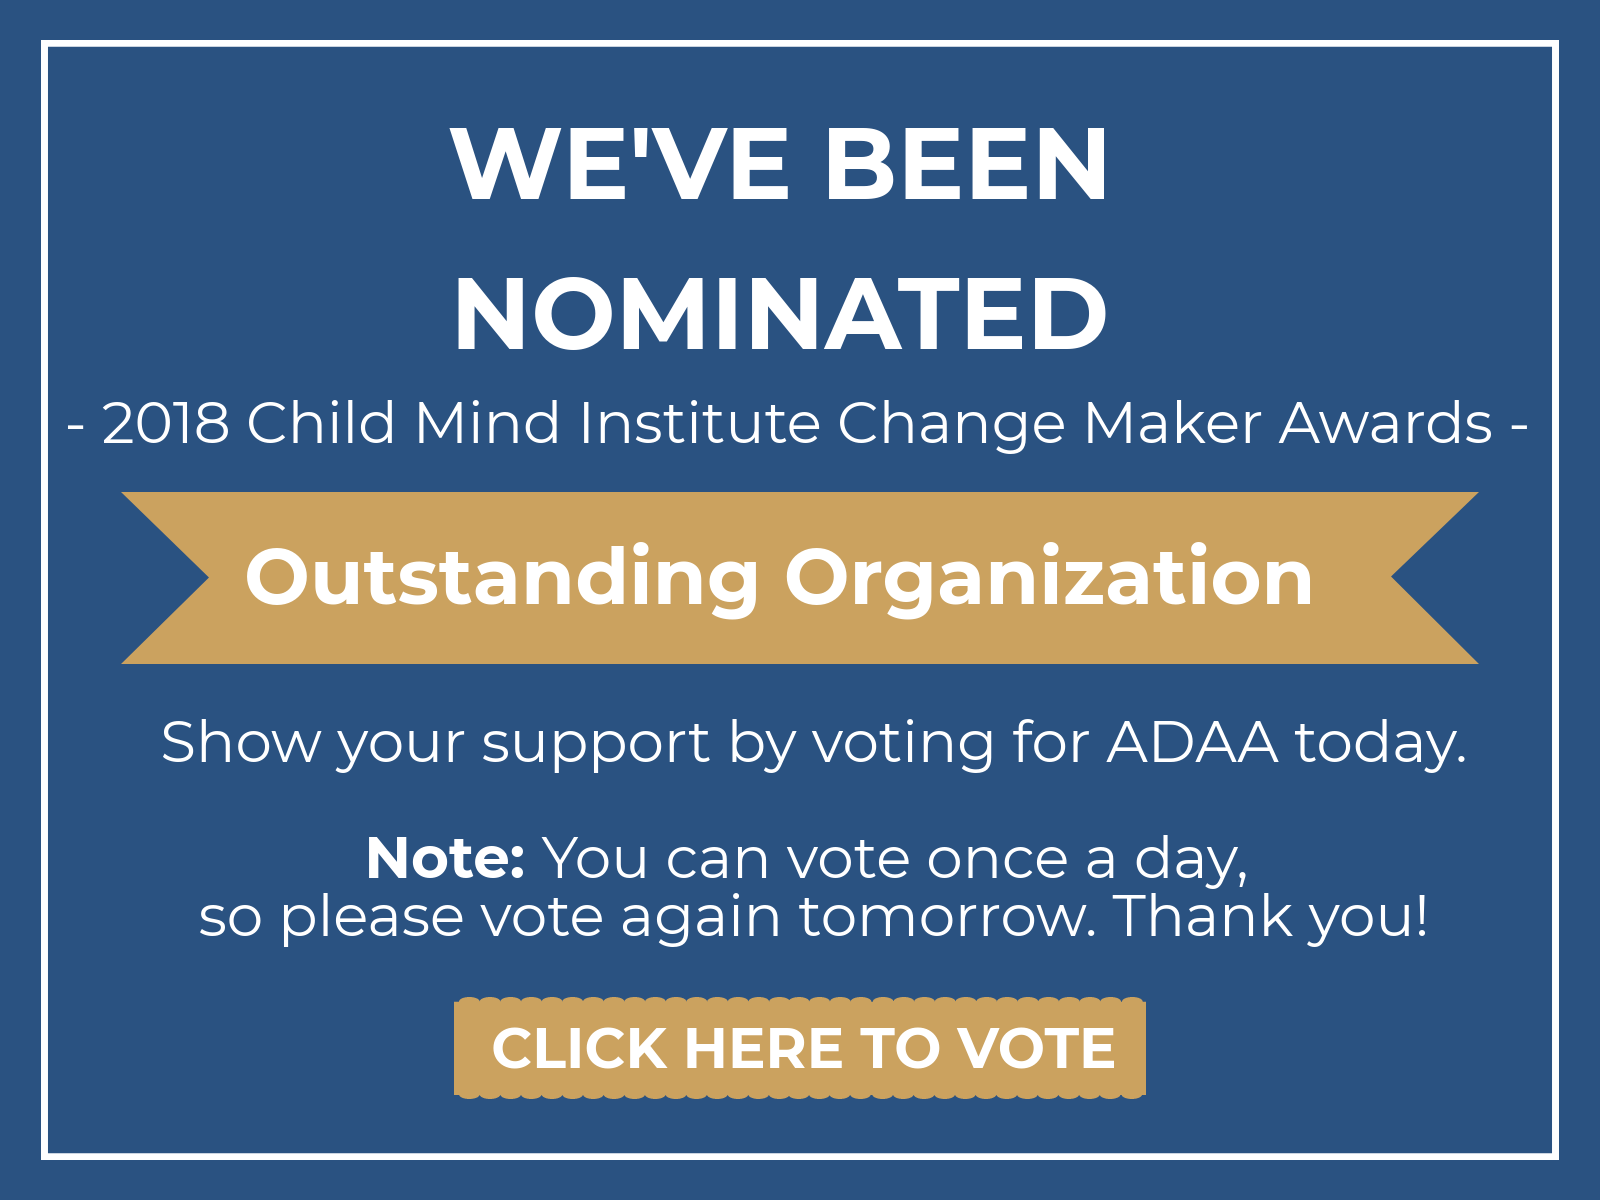 Vote ADAA for the Change Maker Awards